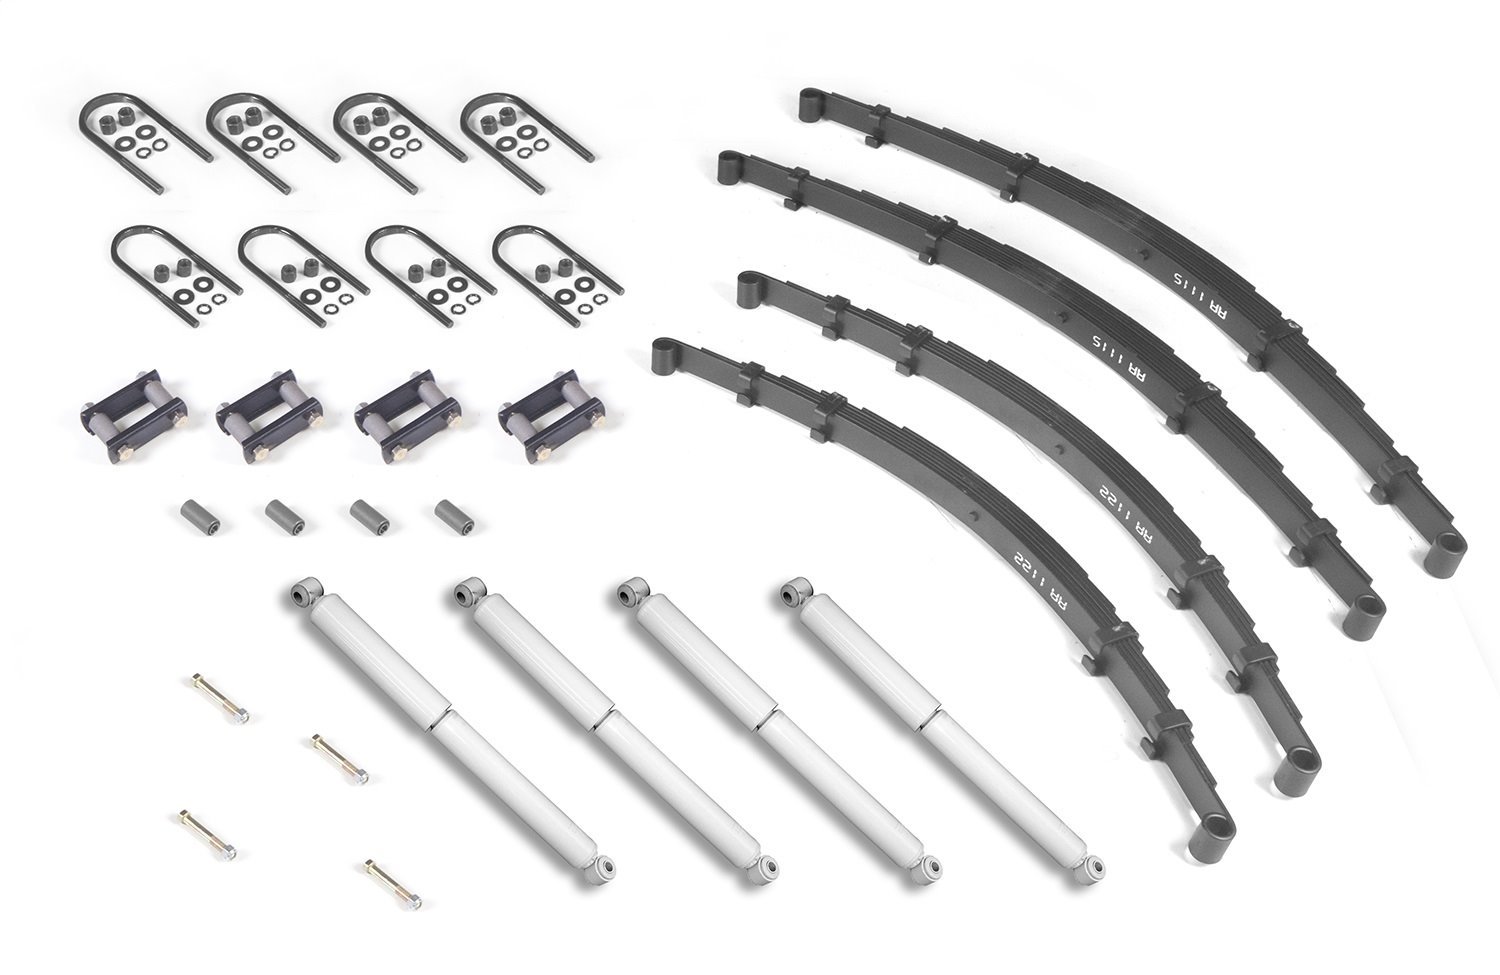 This Suspension Master Rebuilders kit from Omix-ADA fits 59-75 Jeep CJ5 and CJ6.